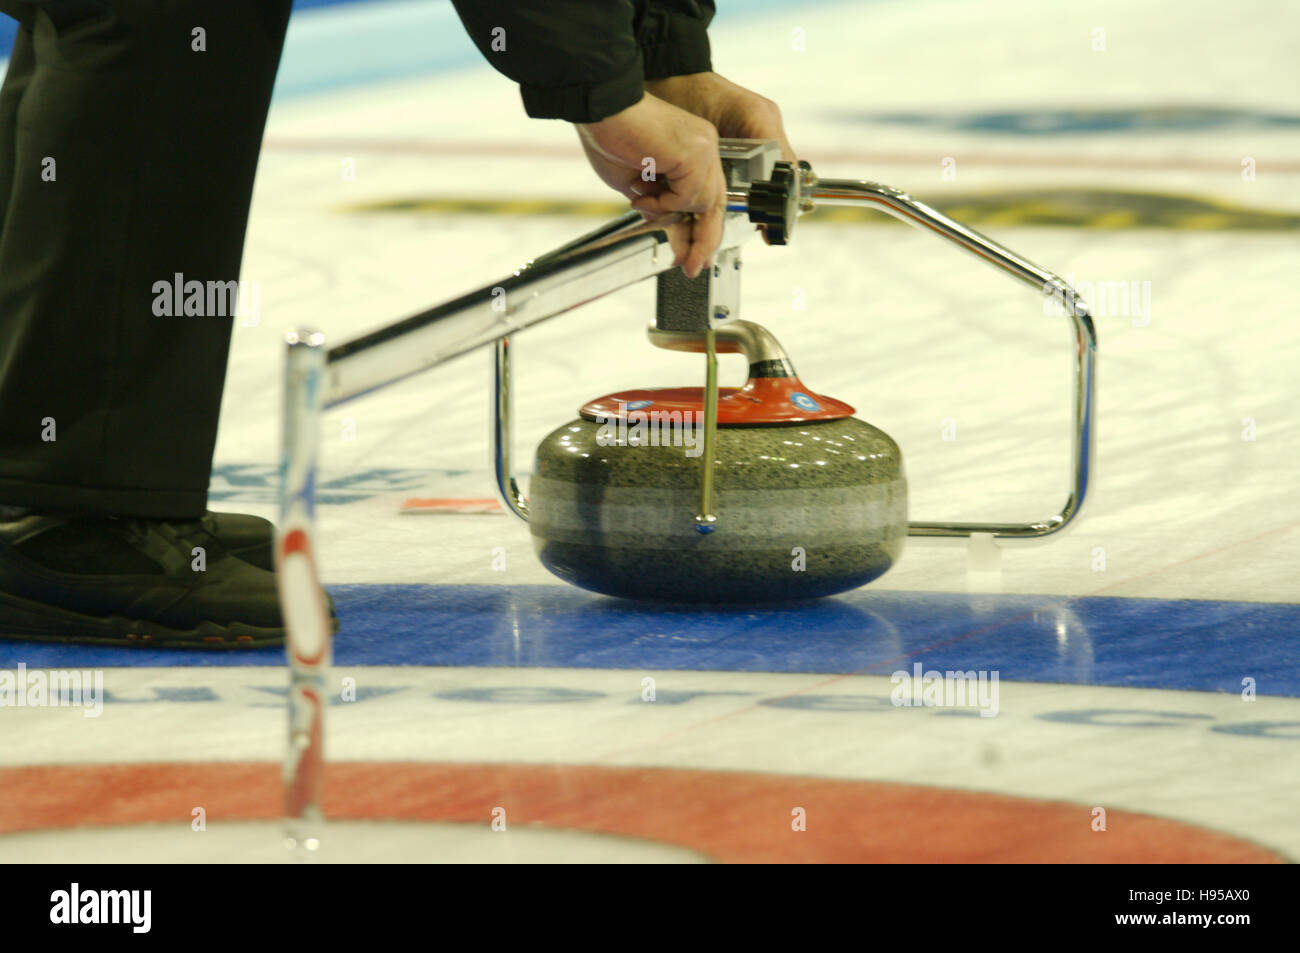 Braehead Arena, Renfrewshire, Scotland, 19 November 2016. Measuring equipment being used to determine the closest curling stone. Credit:  Colin Edwards / Alamy Live News Stock Photo